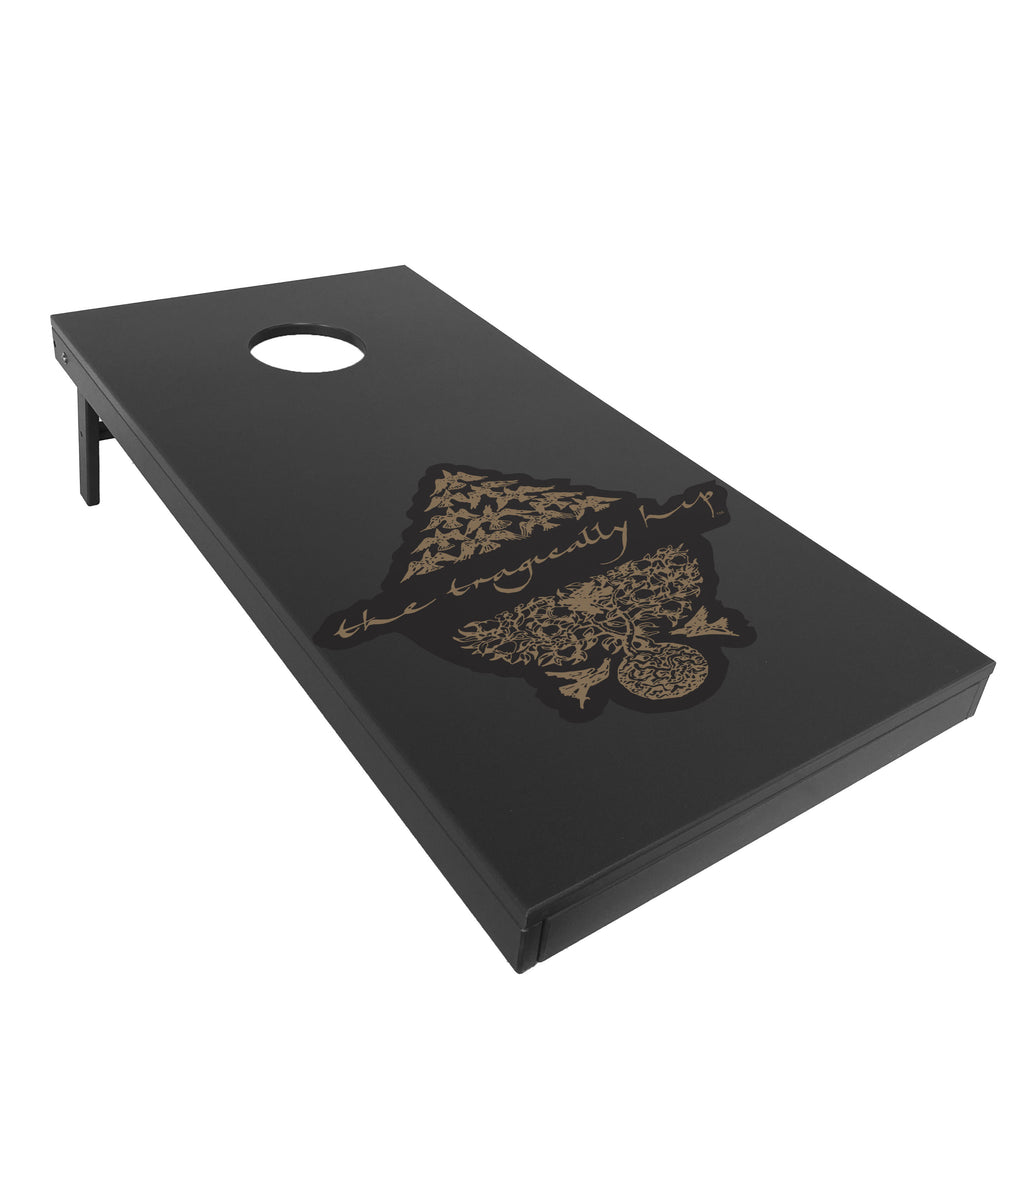 Yer Favourites Cornhole "Officially Licensed by The Tragically Hip"